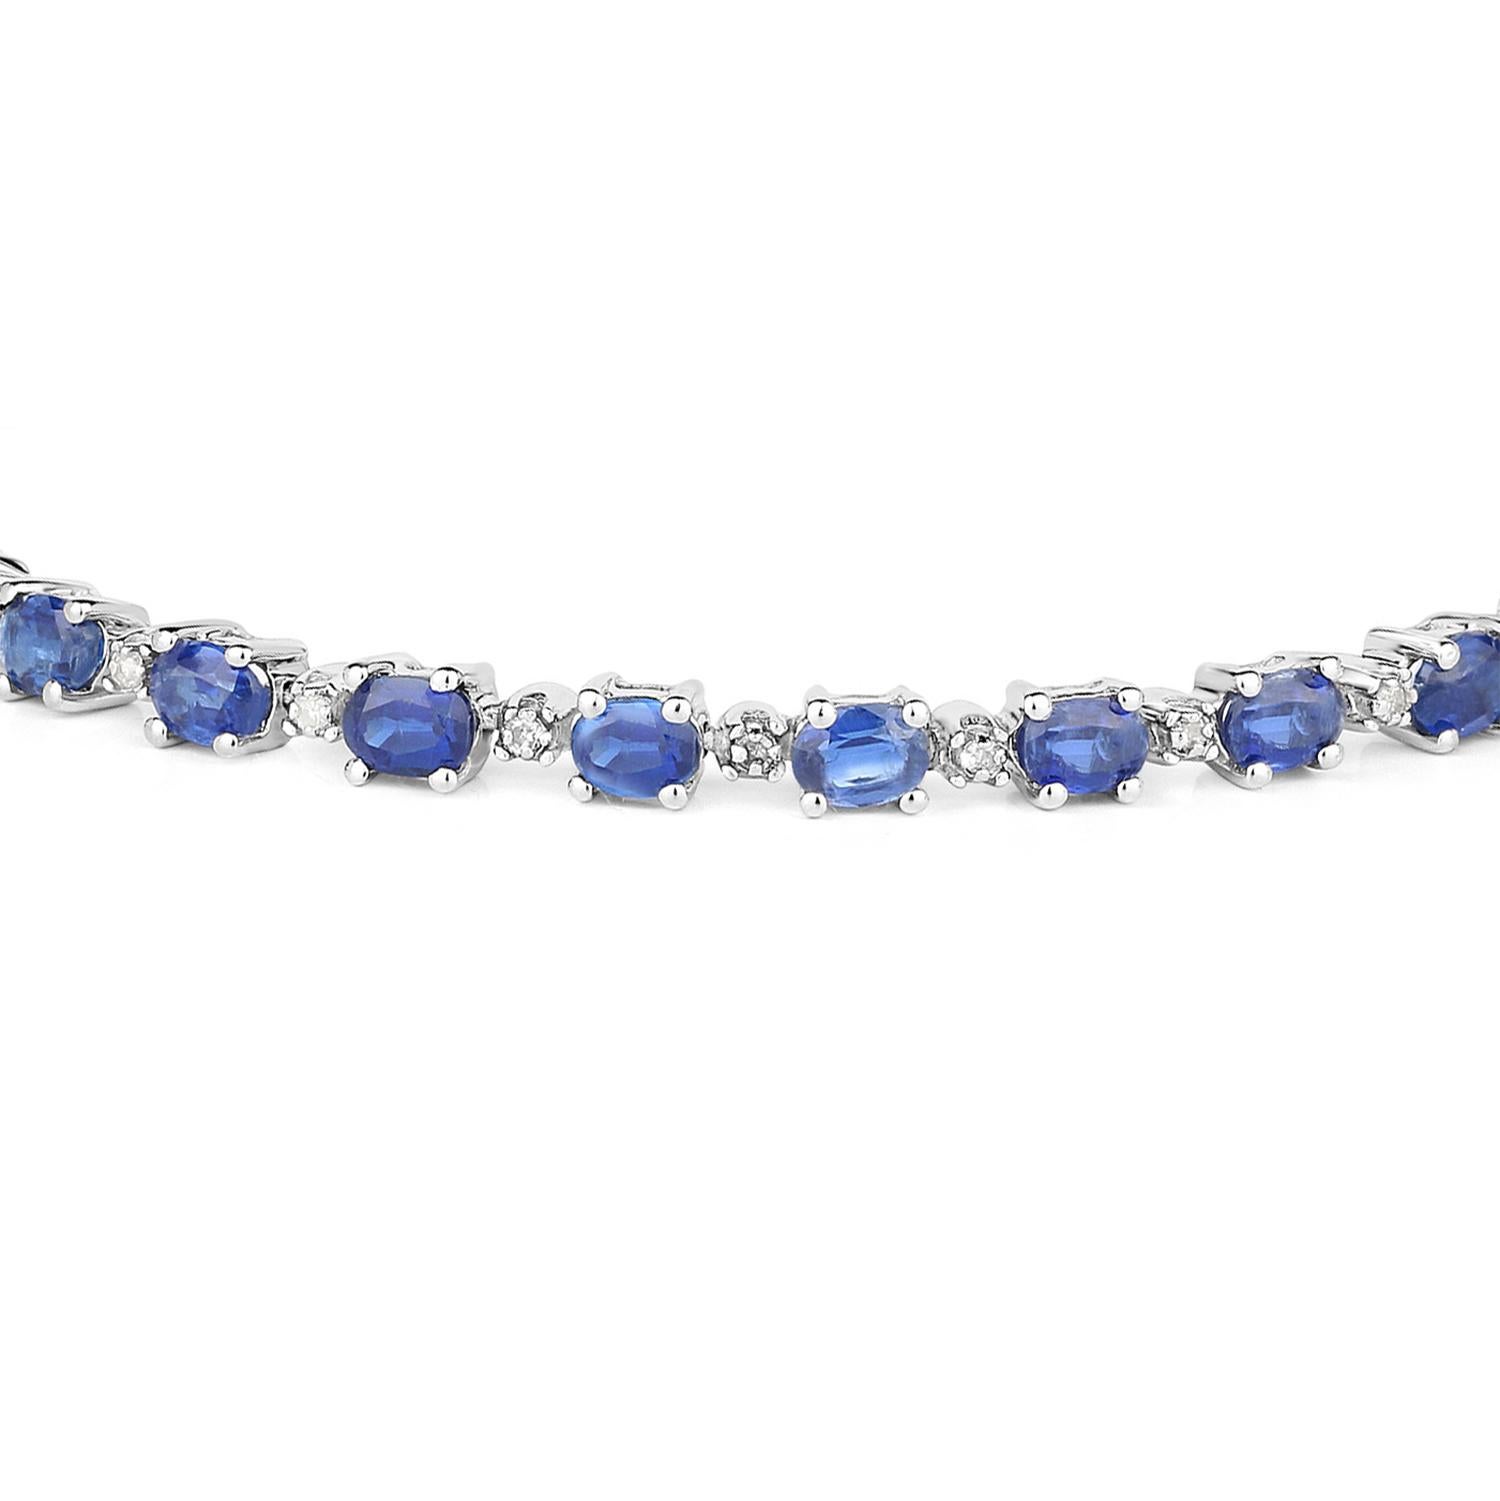 Mixed Cut Kyanite Tennis Bracelet With Diamonds 6.73 Carats Rhodium Plated Sterling Silver For Sale